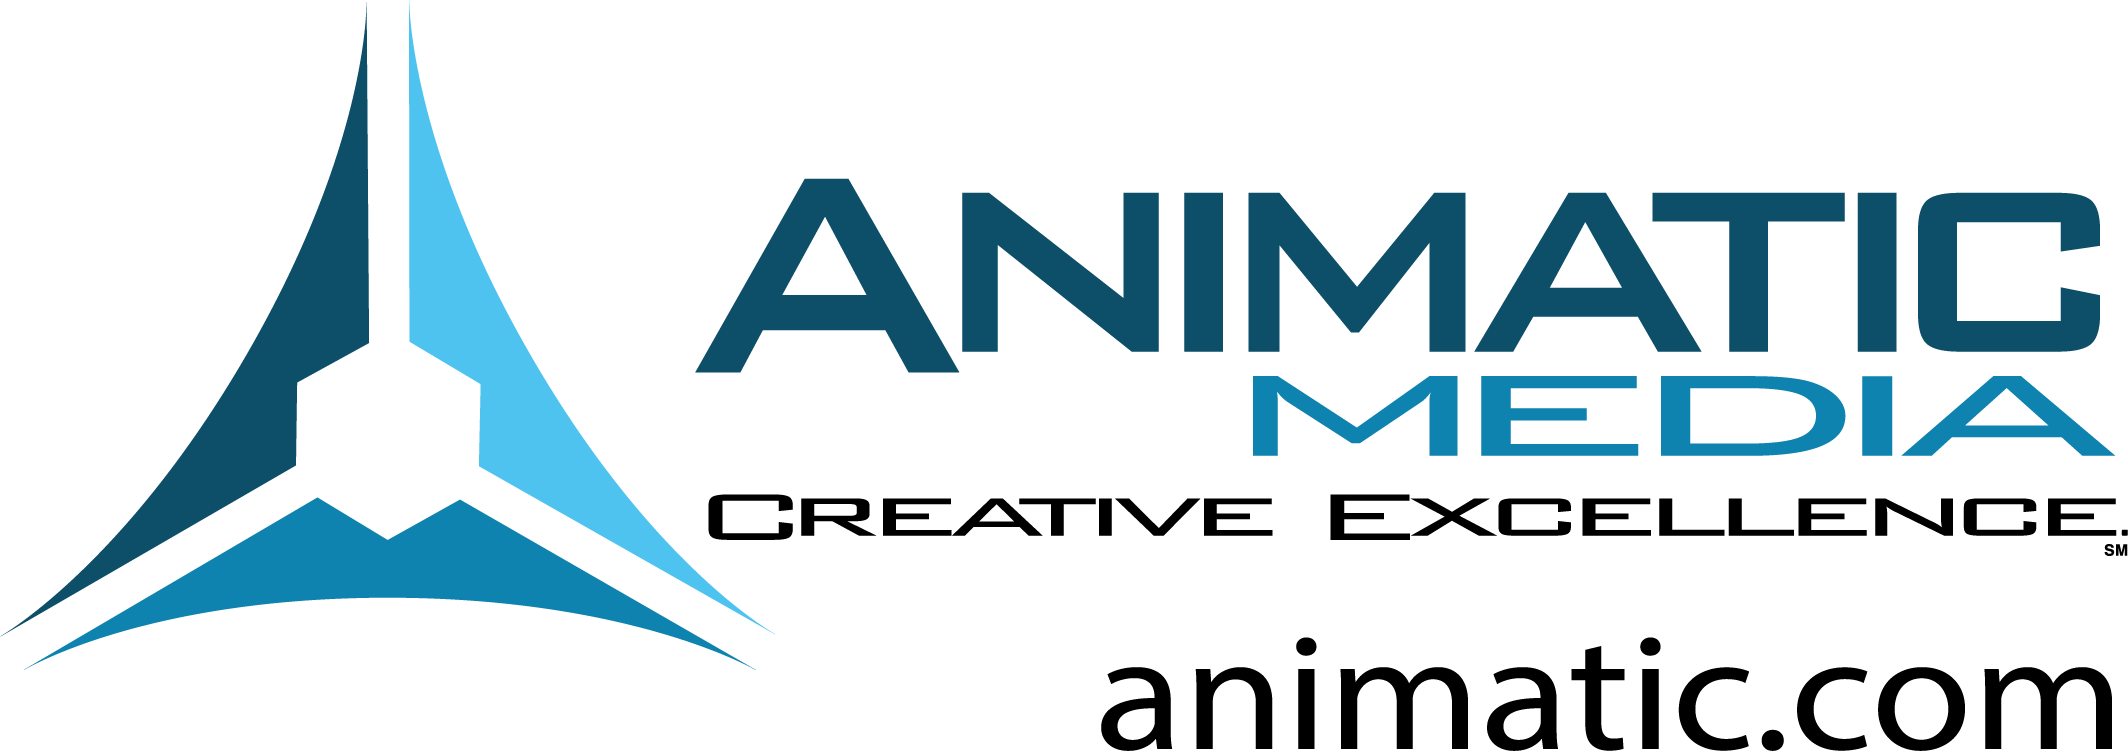 ANIMATIC-LOGO-Final2008-Outlines-wSM and url.png